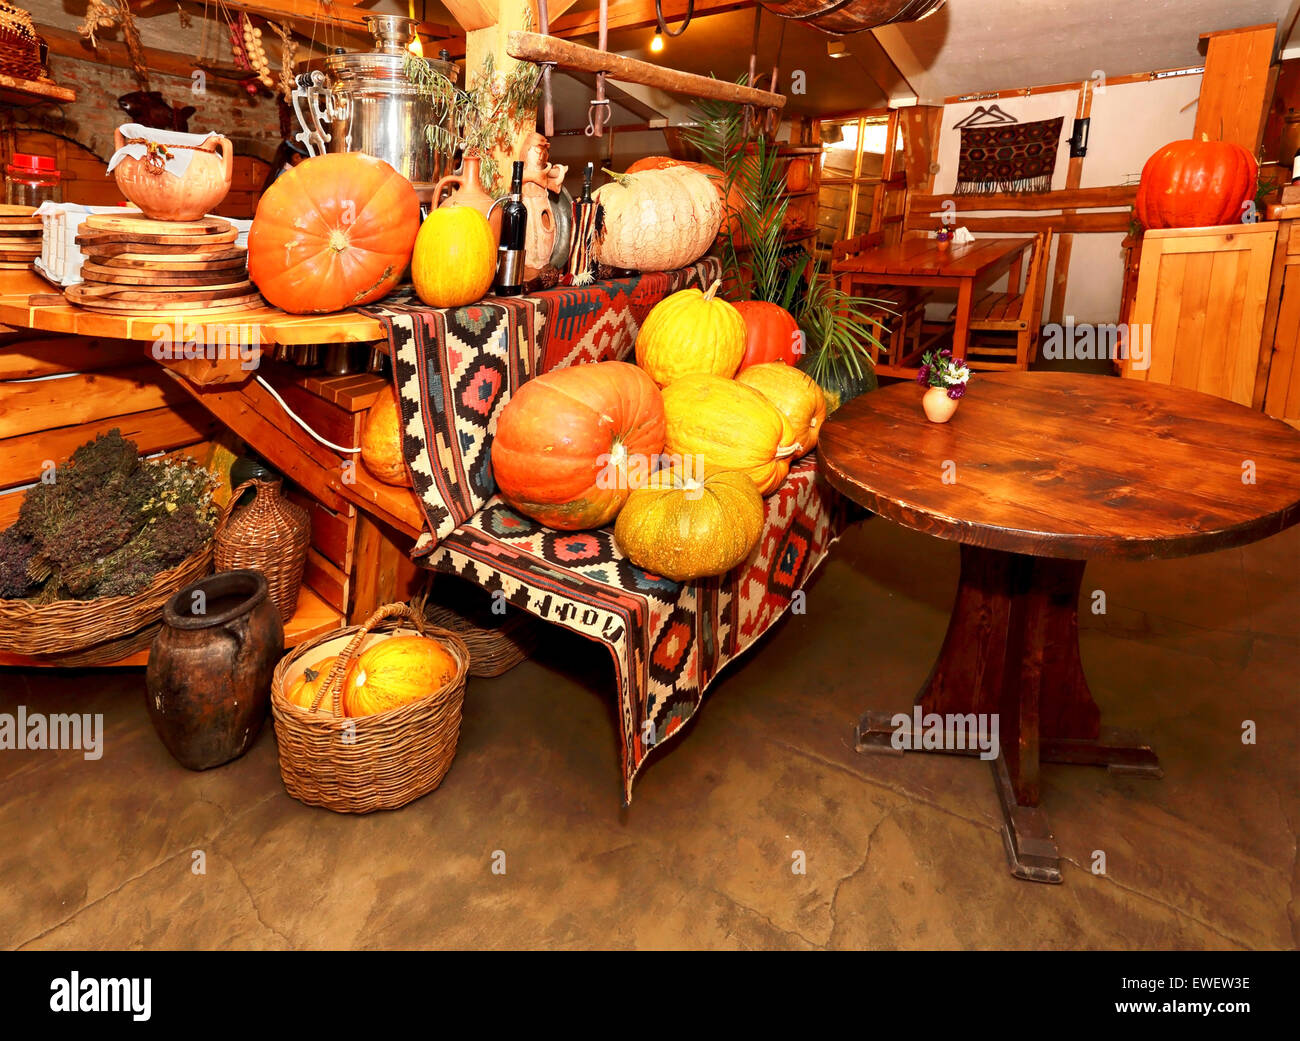 Interior of the country restaurant decorated with rural autumn vegetables Stock Photo